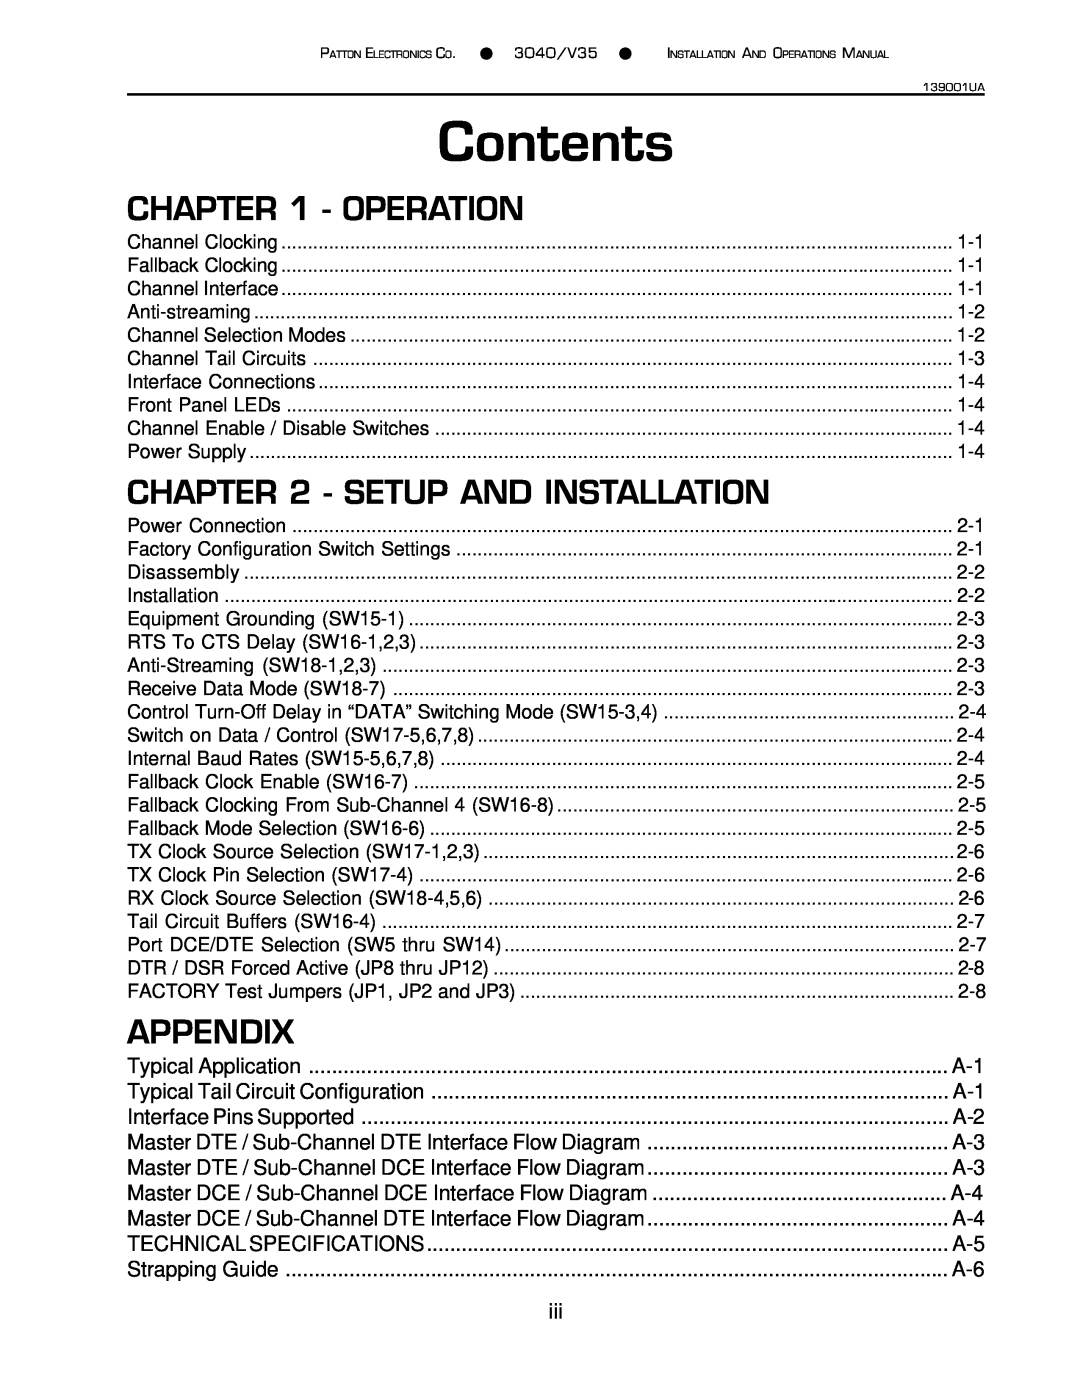 Patton electronic 3040/V35 manual Contents, Operation, Setup And Installation, Appendix 